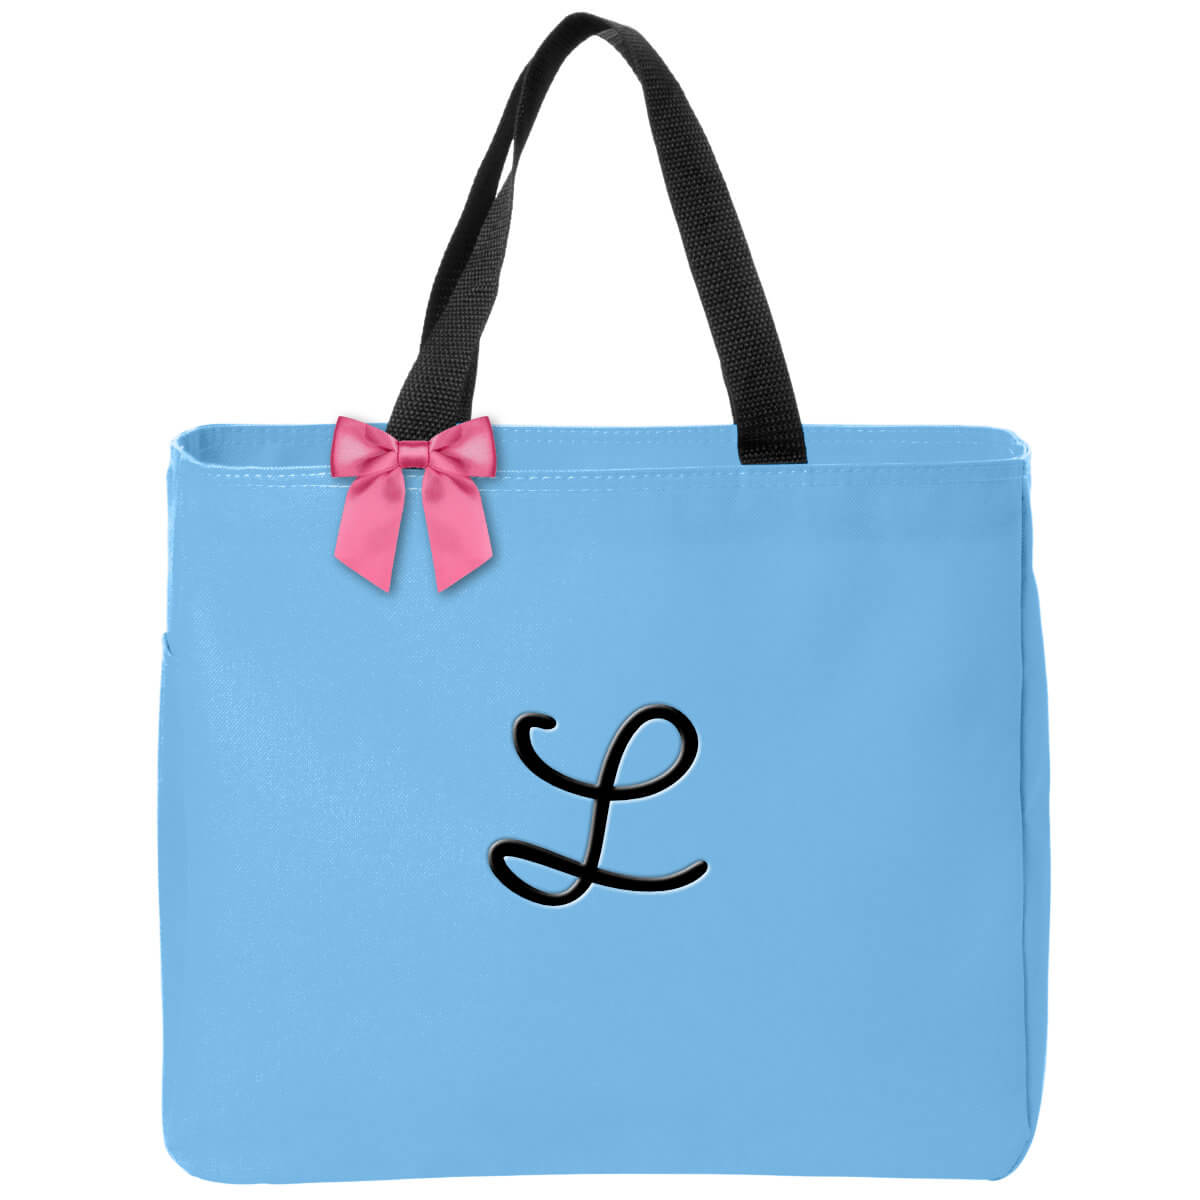 Personalized Solid Tote Bag with Initial